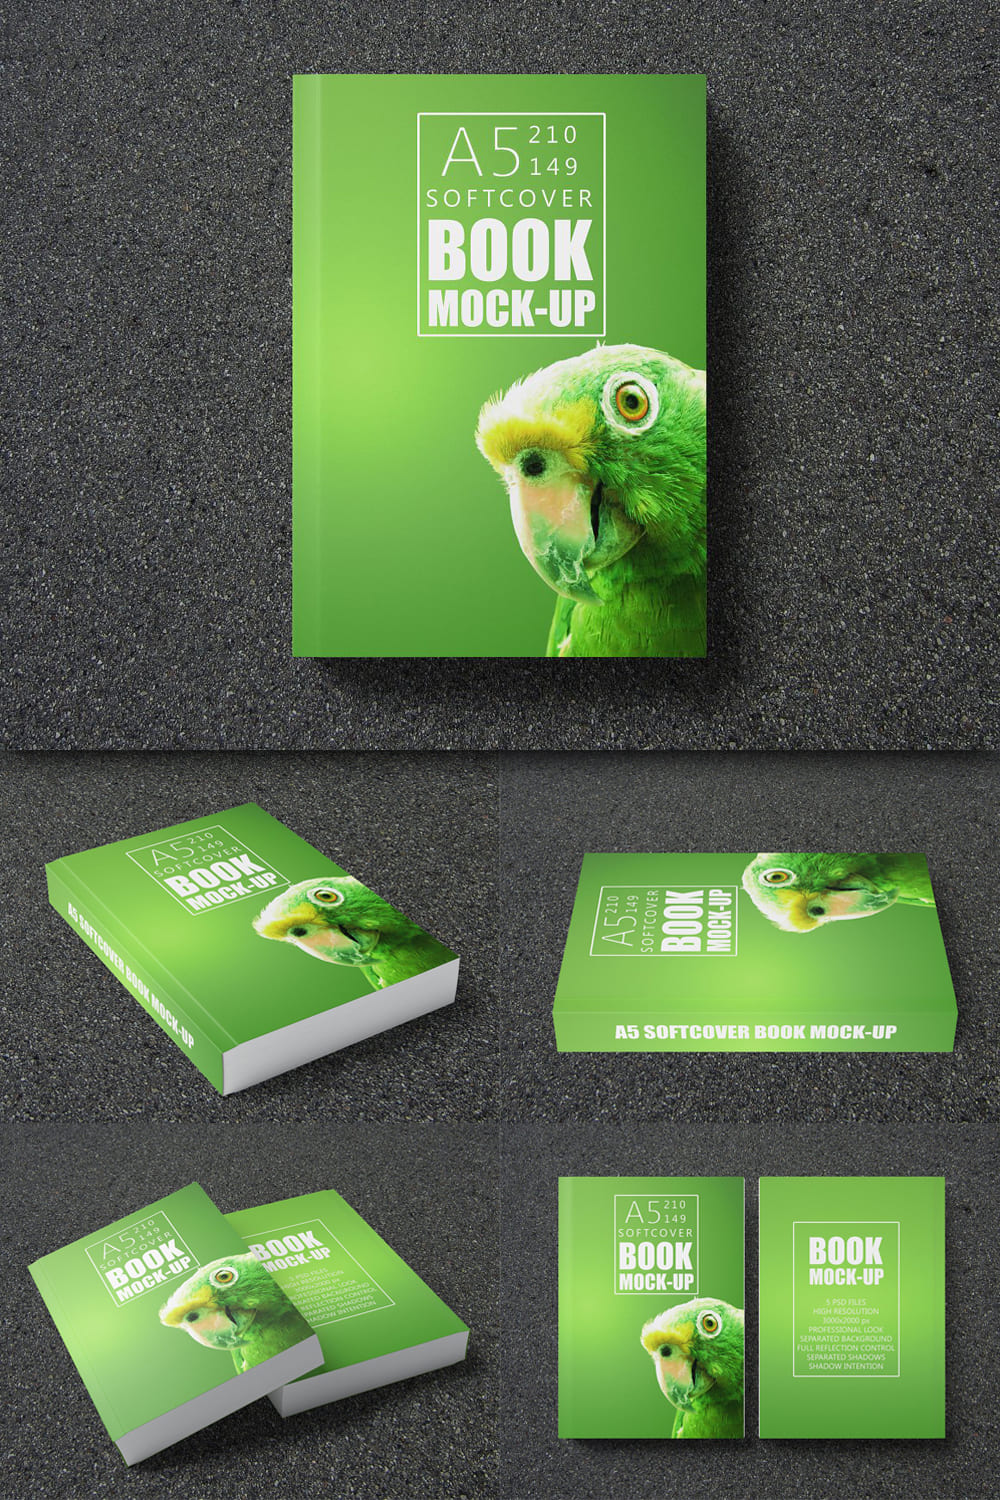 963051 book mock up a5 soft cover pinterest 1000 1500